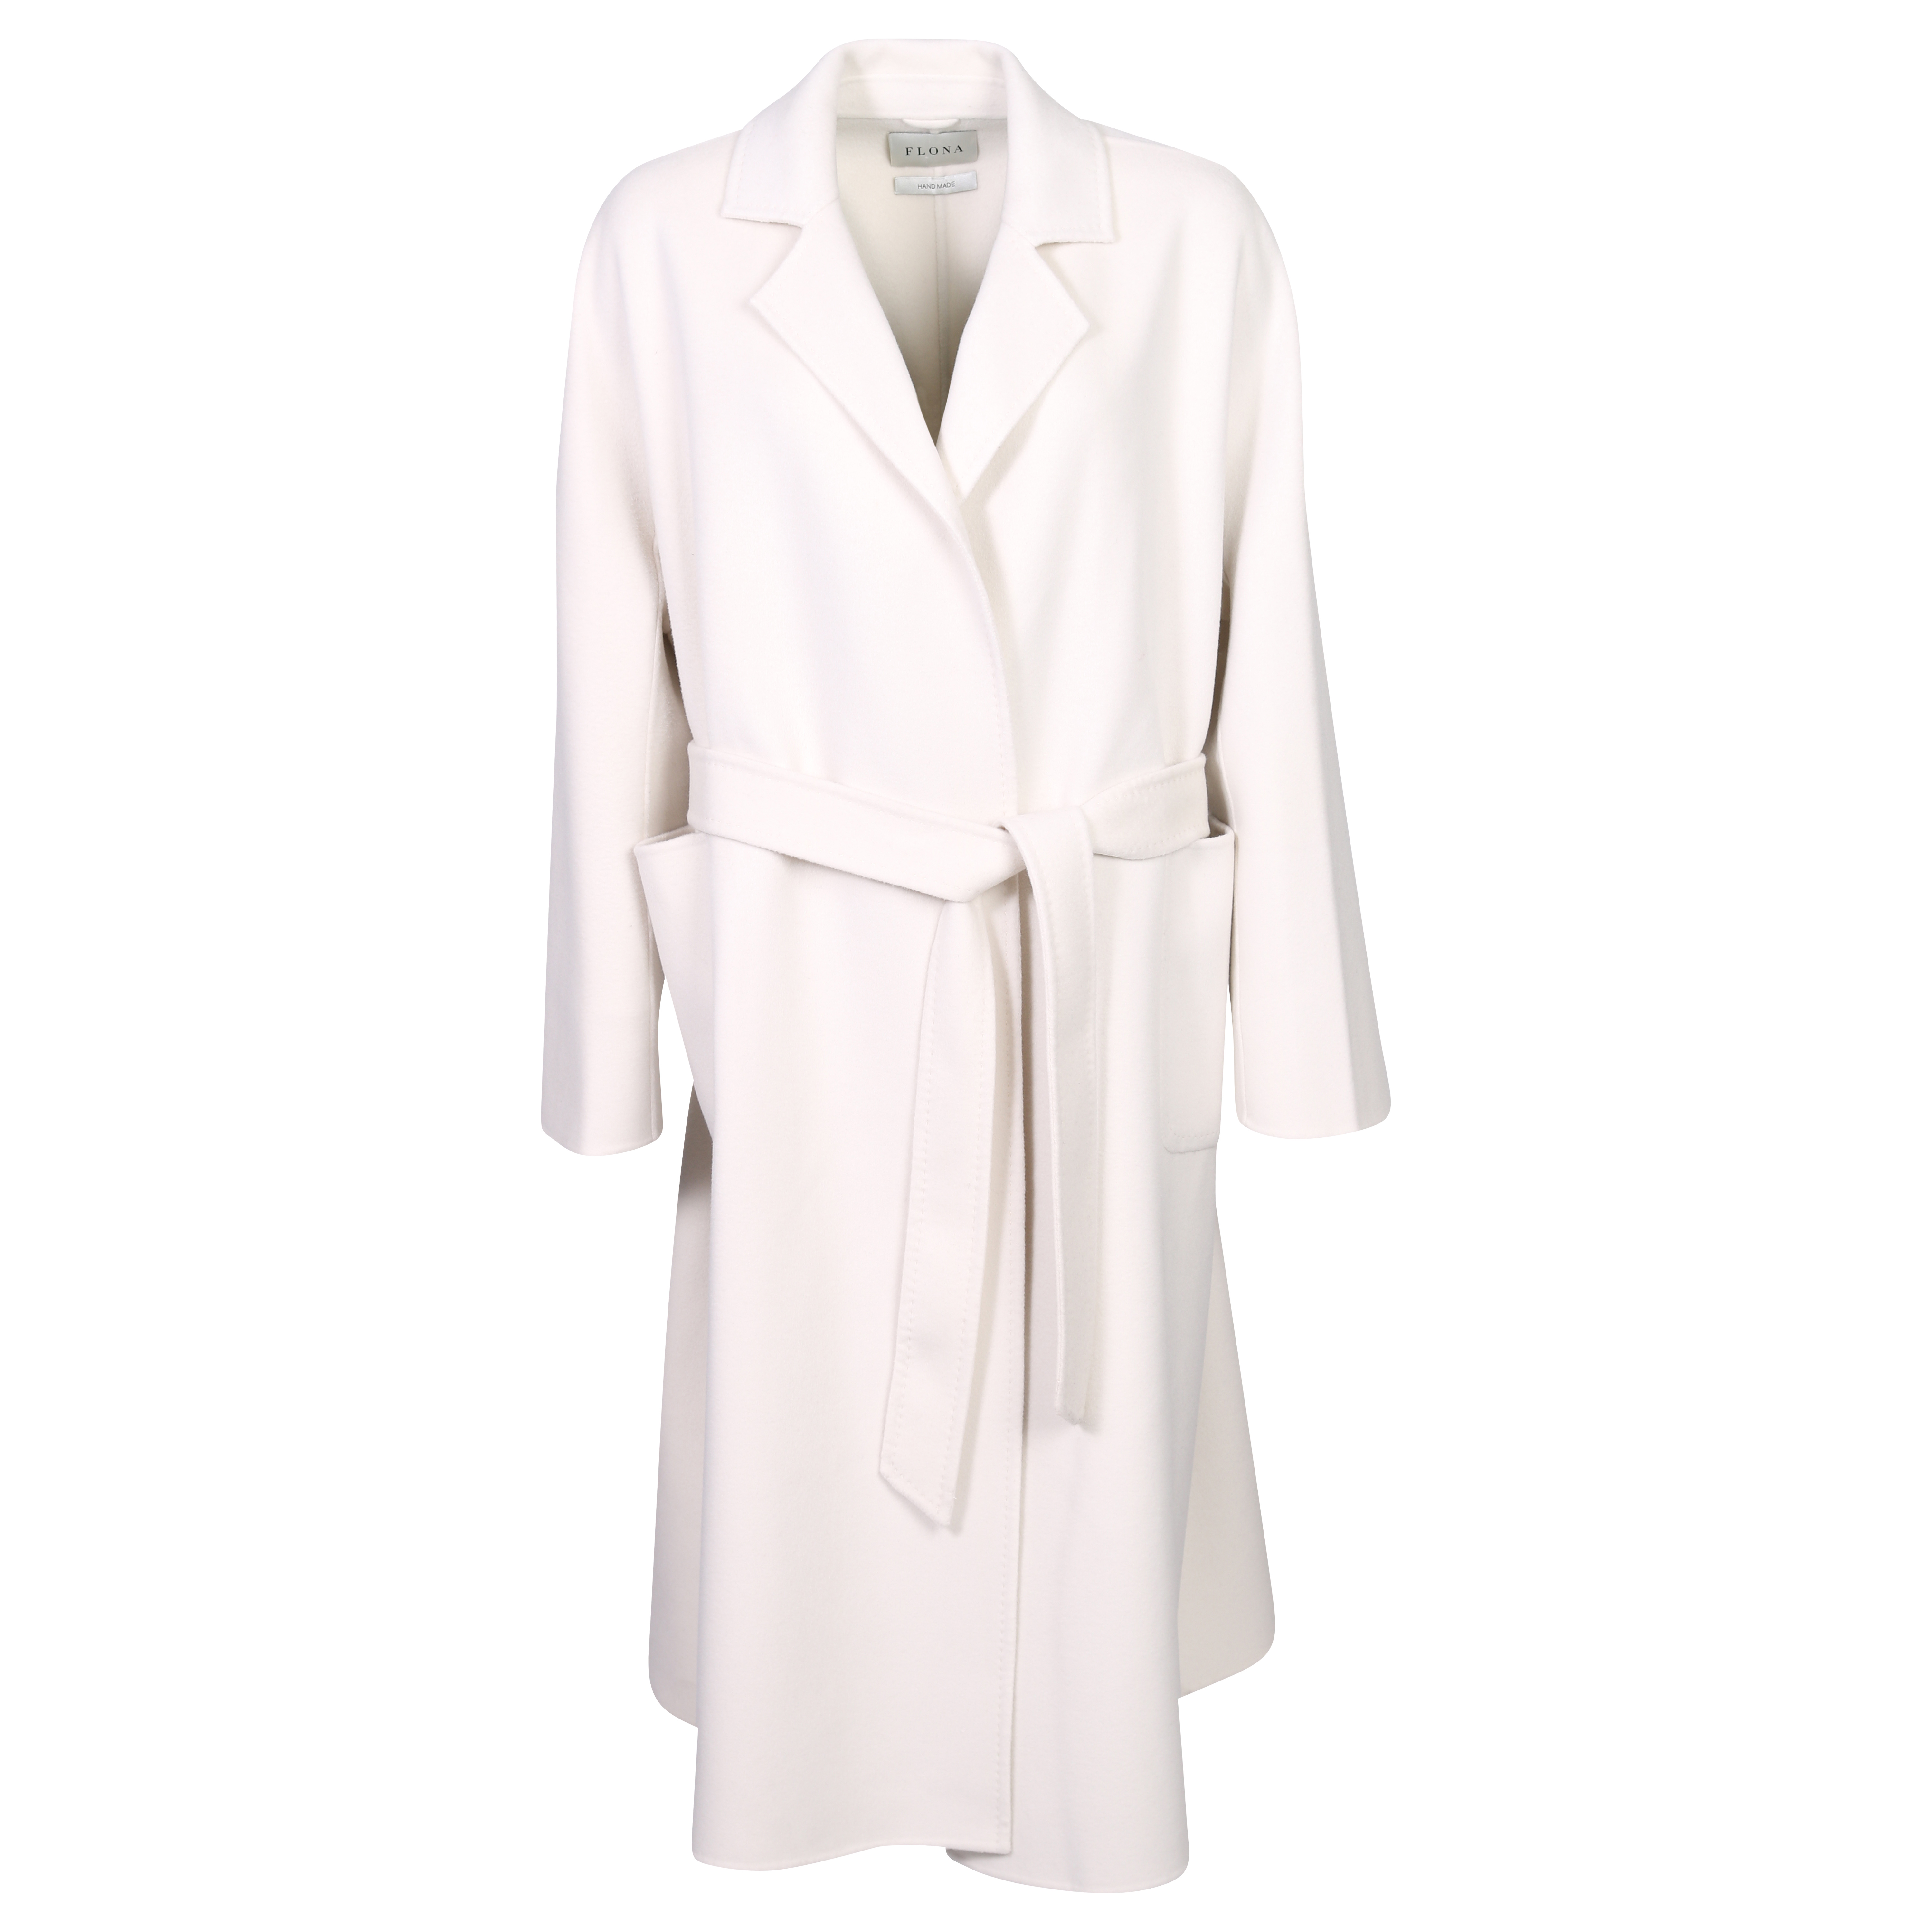 Flona Wool/Cashmere Coat in Offwhite M/L